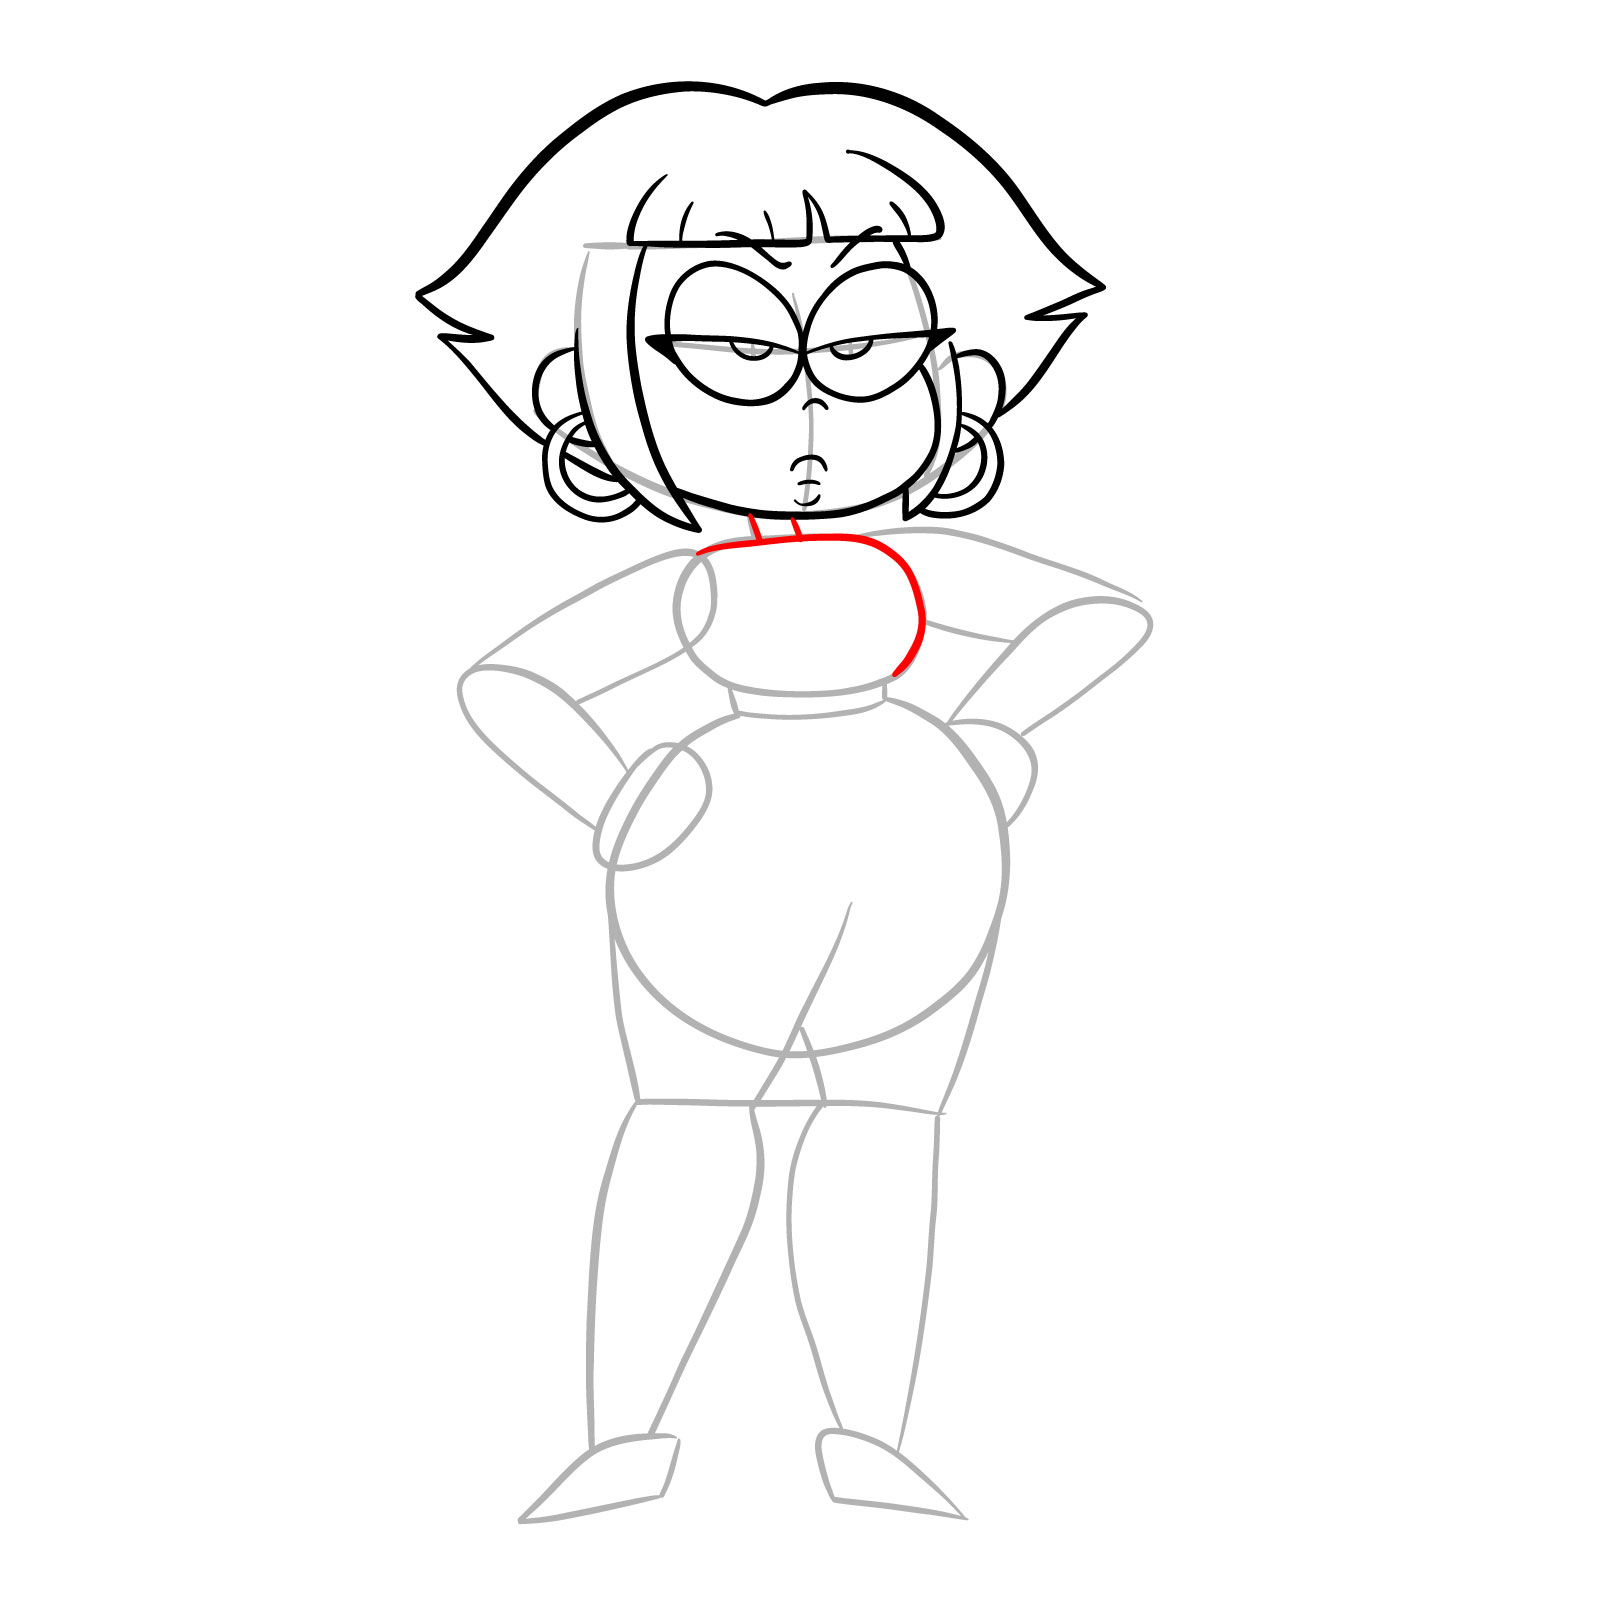 How to draw Human Shannon from OK K.O.! - step 14